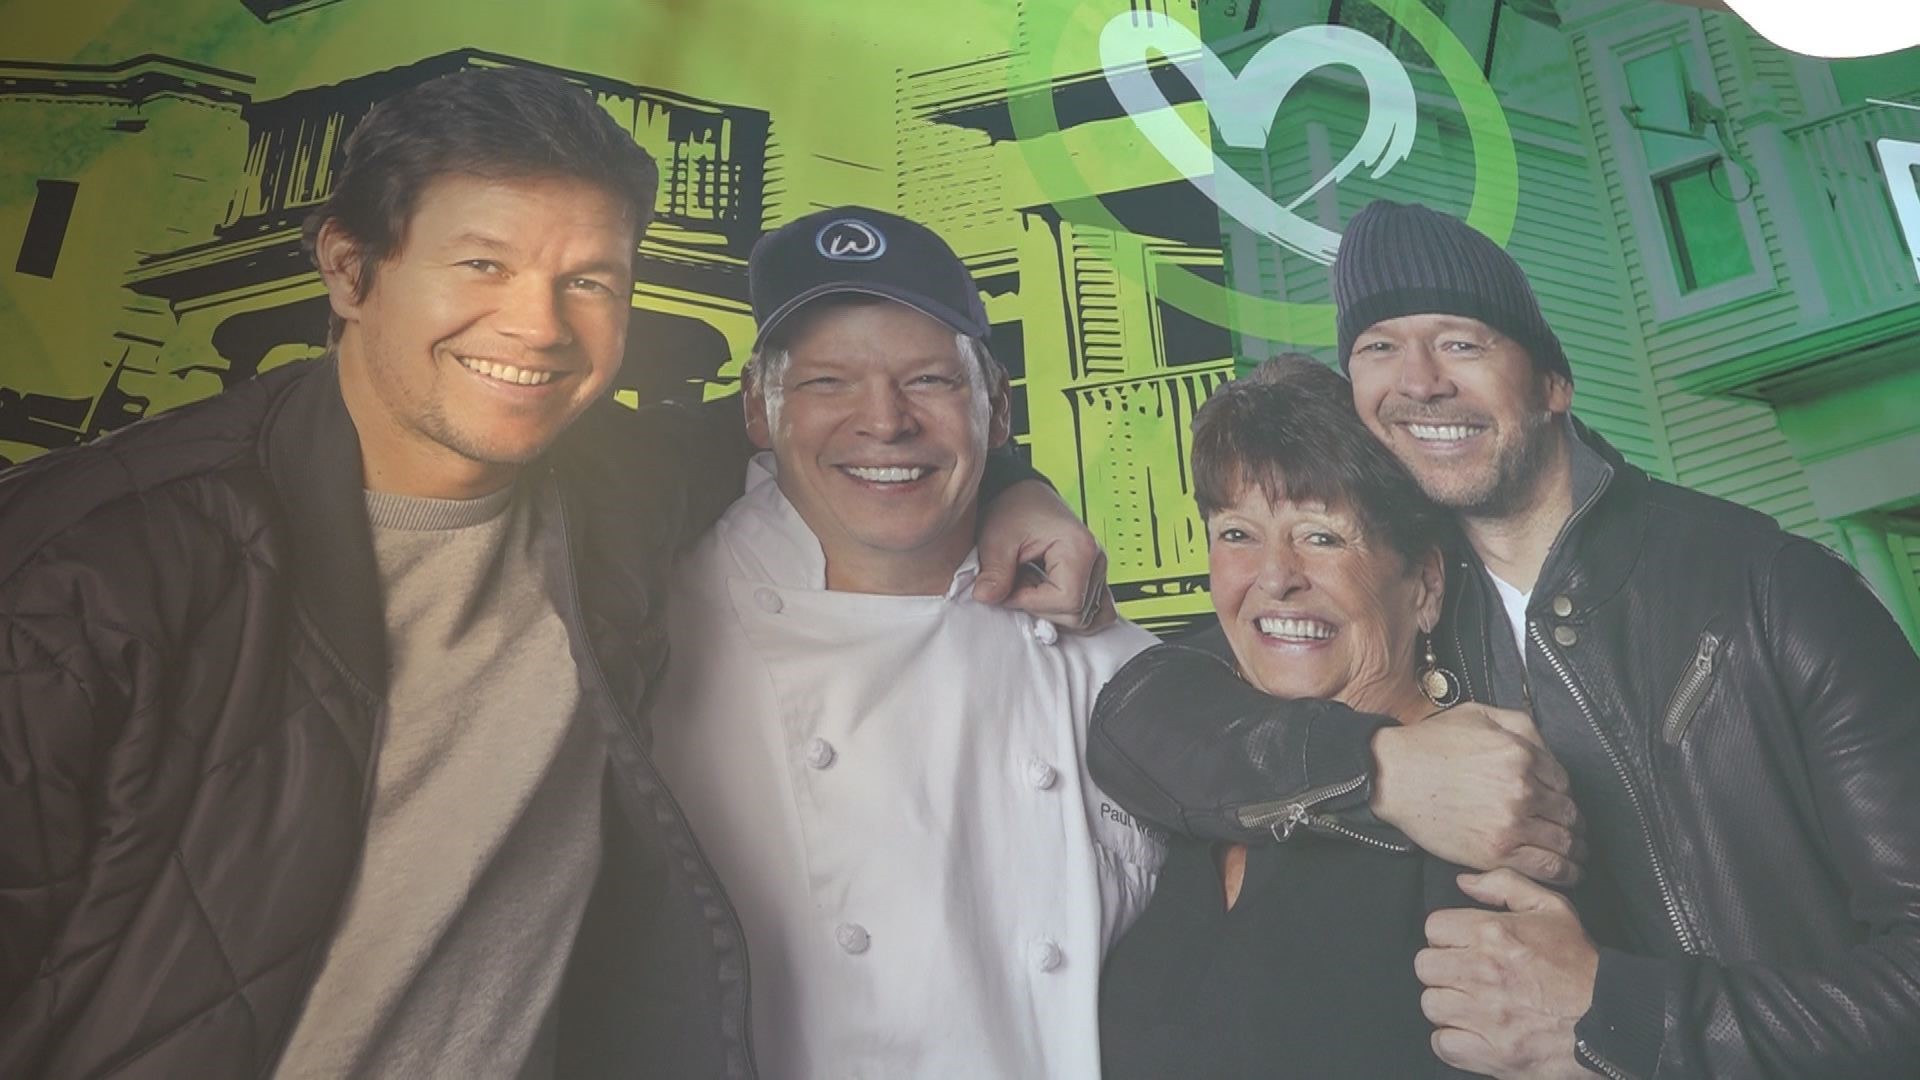 Wahlburgers, the Boston born-and-bred burger restaurant from brothers Mark, Donnie and Paul Wahlberg featured on the long-running A&E reality series of the same name, will transform their Atlanta location at The Battery Atlanta into “Foxborough South” for New England Patriots fans leading up to Super Bowl LIII.